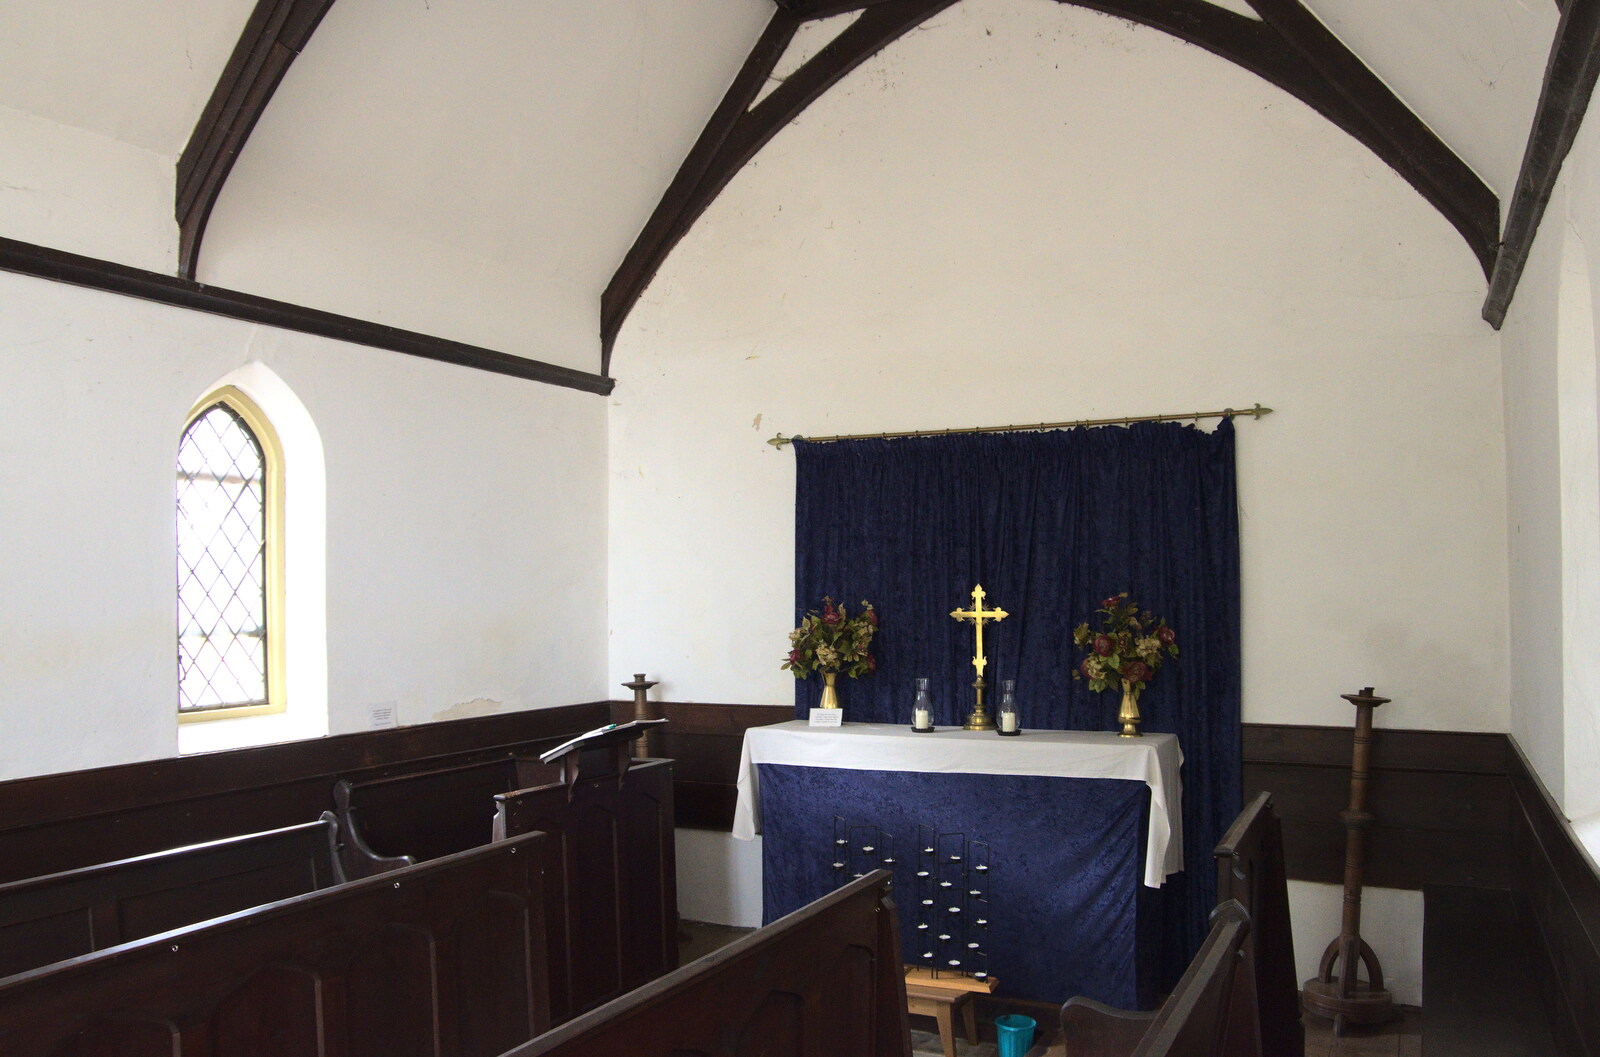 A Heritage Open Day, Eye, Suffolk - 18th September 2022: Inside the C of E chapel